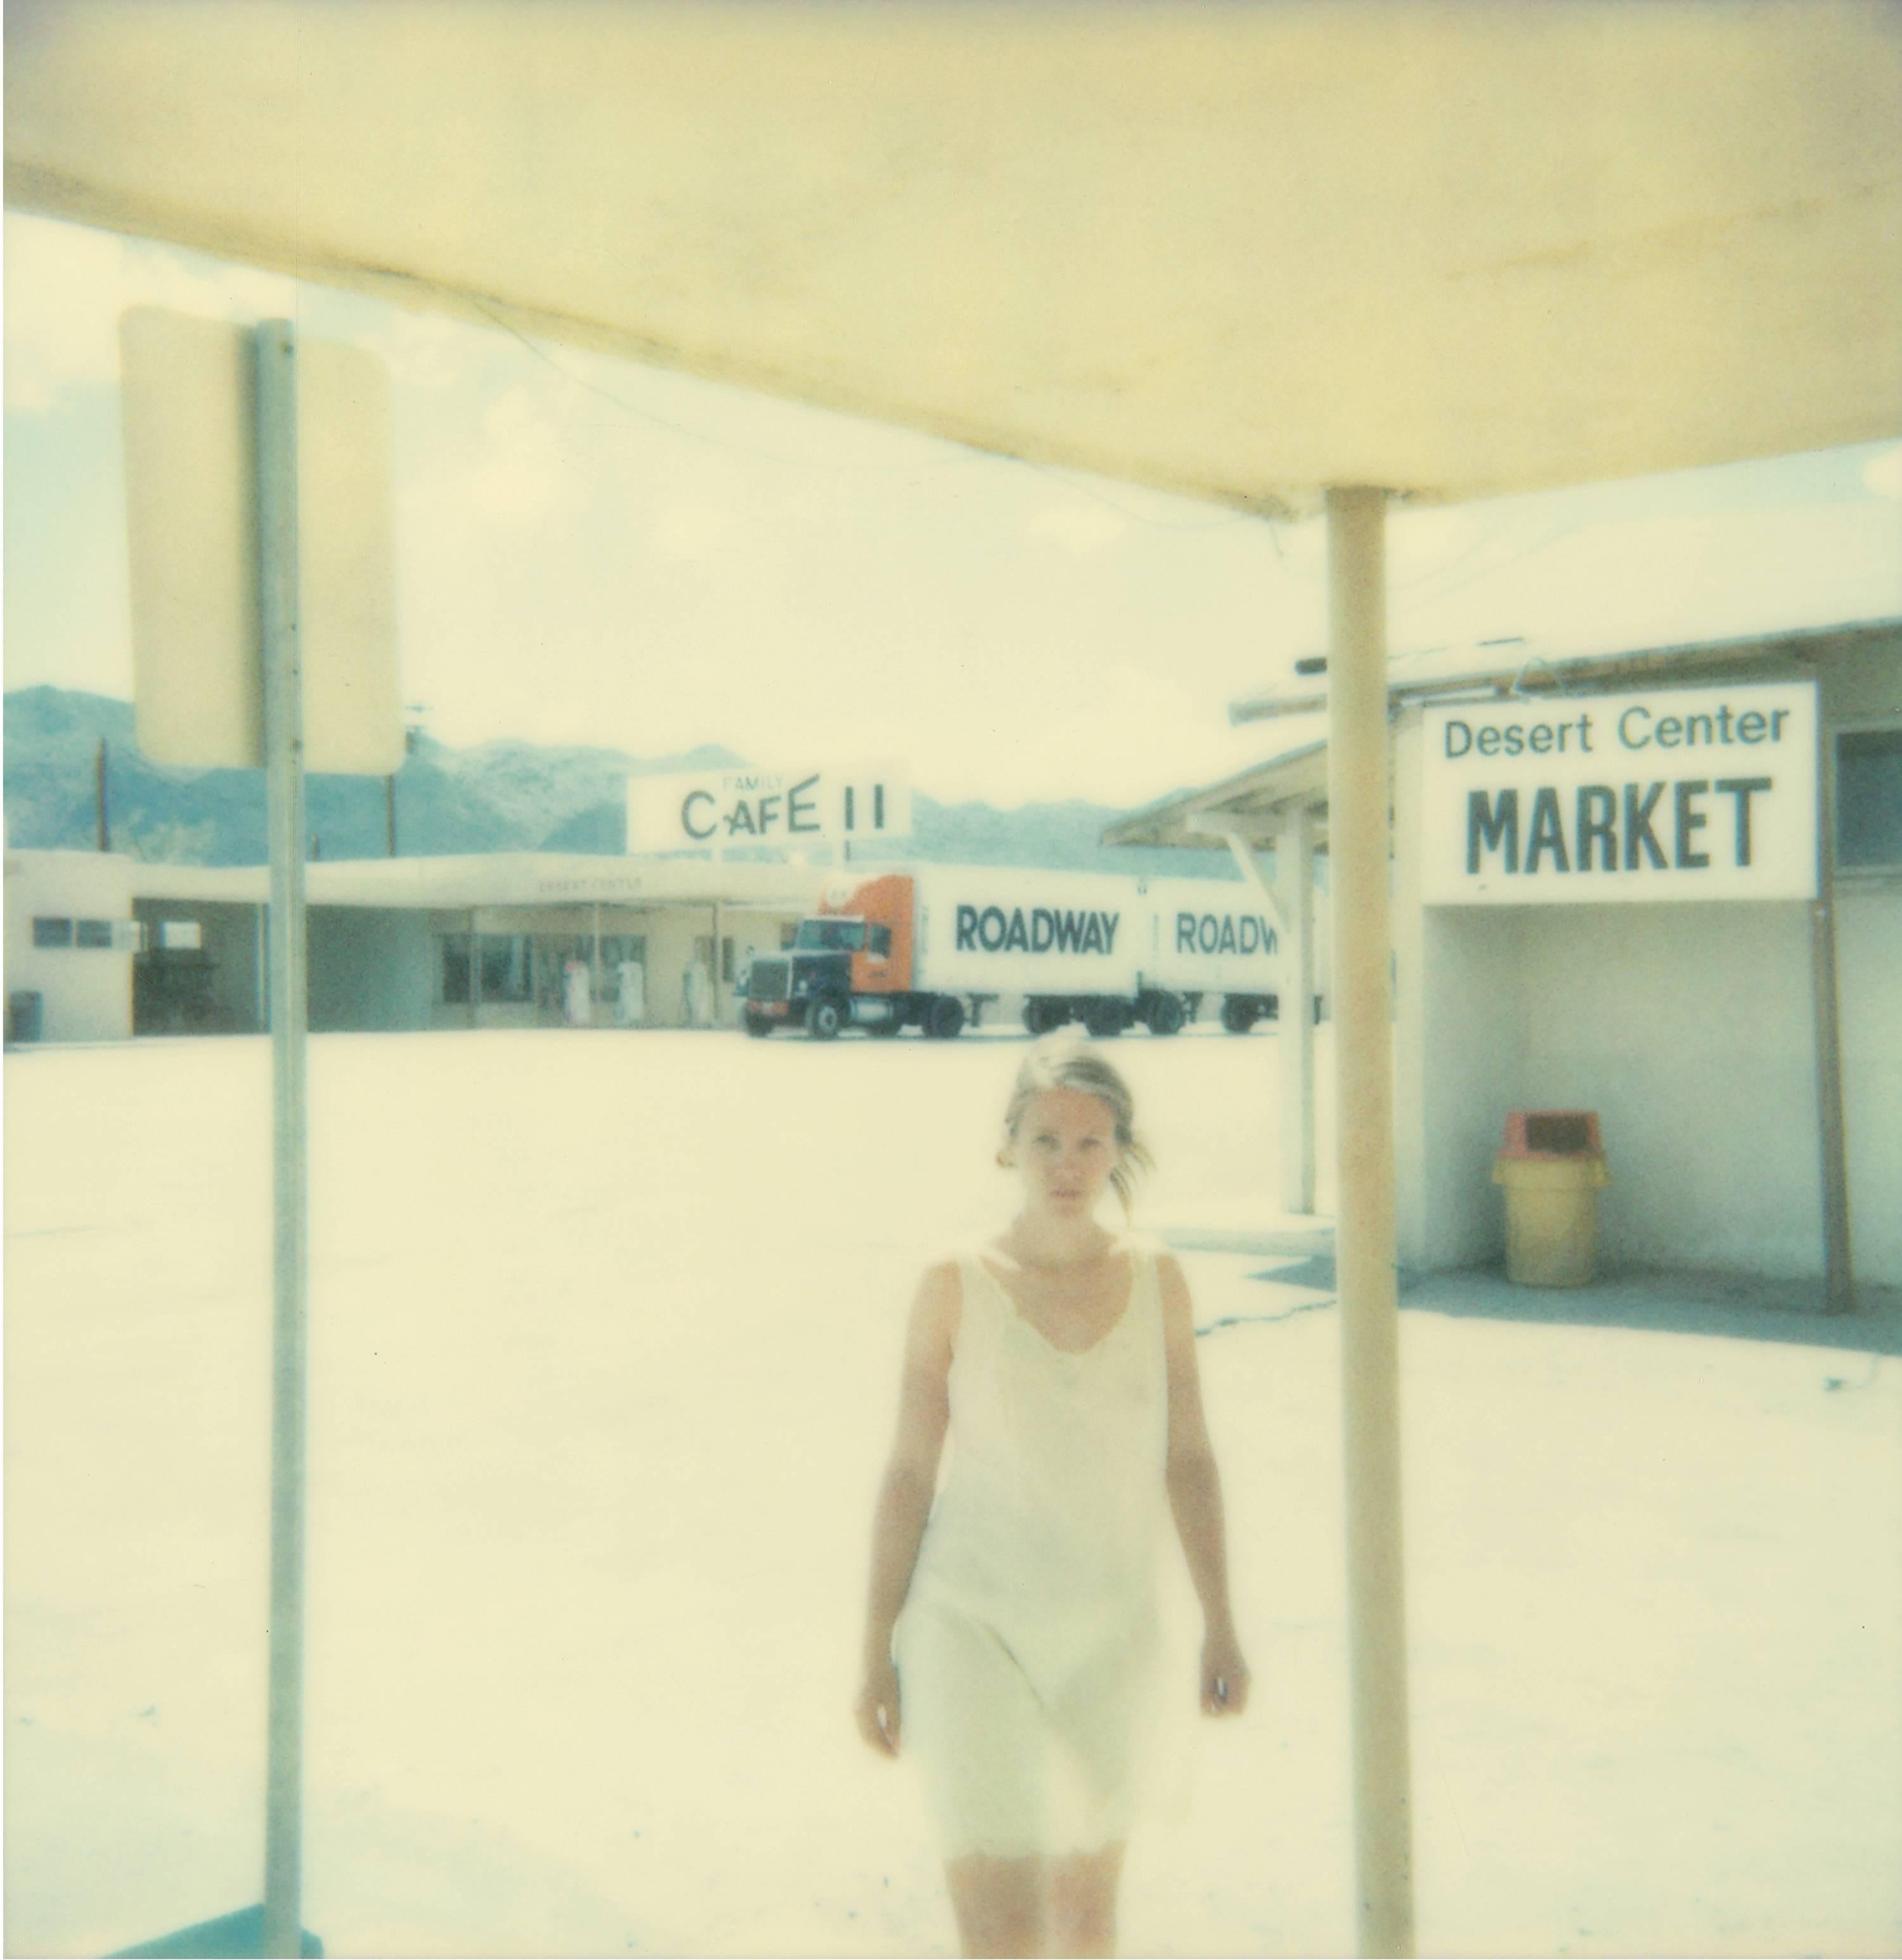 Gasstation (Stranger than Paradise) - 2000

Edition of 9/10.
3 x 58 x 56 x 0.3 cm, 58 x 188 cm installed.
3 Analog C-Prints, hand-printed by the artist based on 3 original Polaroids. 
Mounted on Aluminum with matte UV-Protection. 
Artist Inventory #